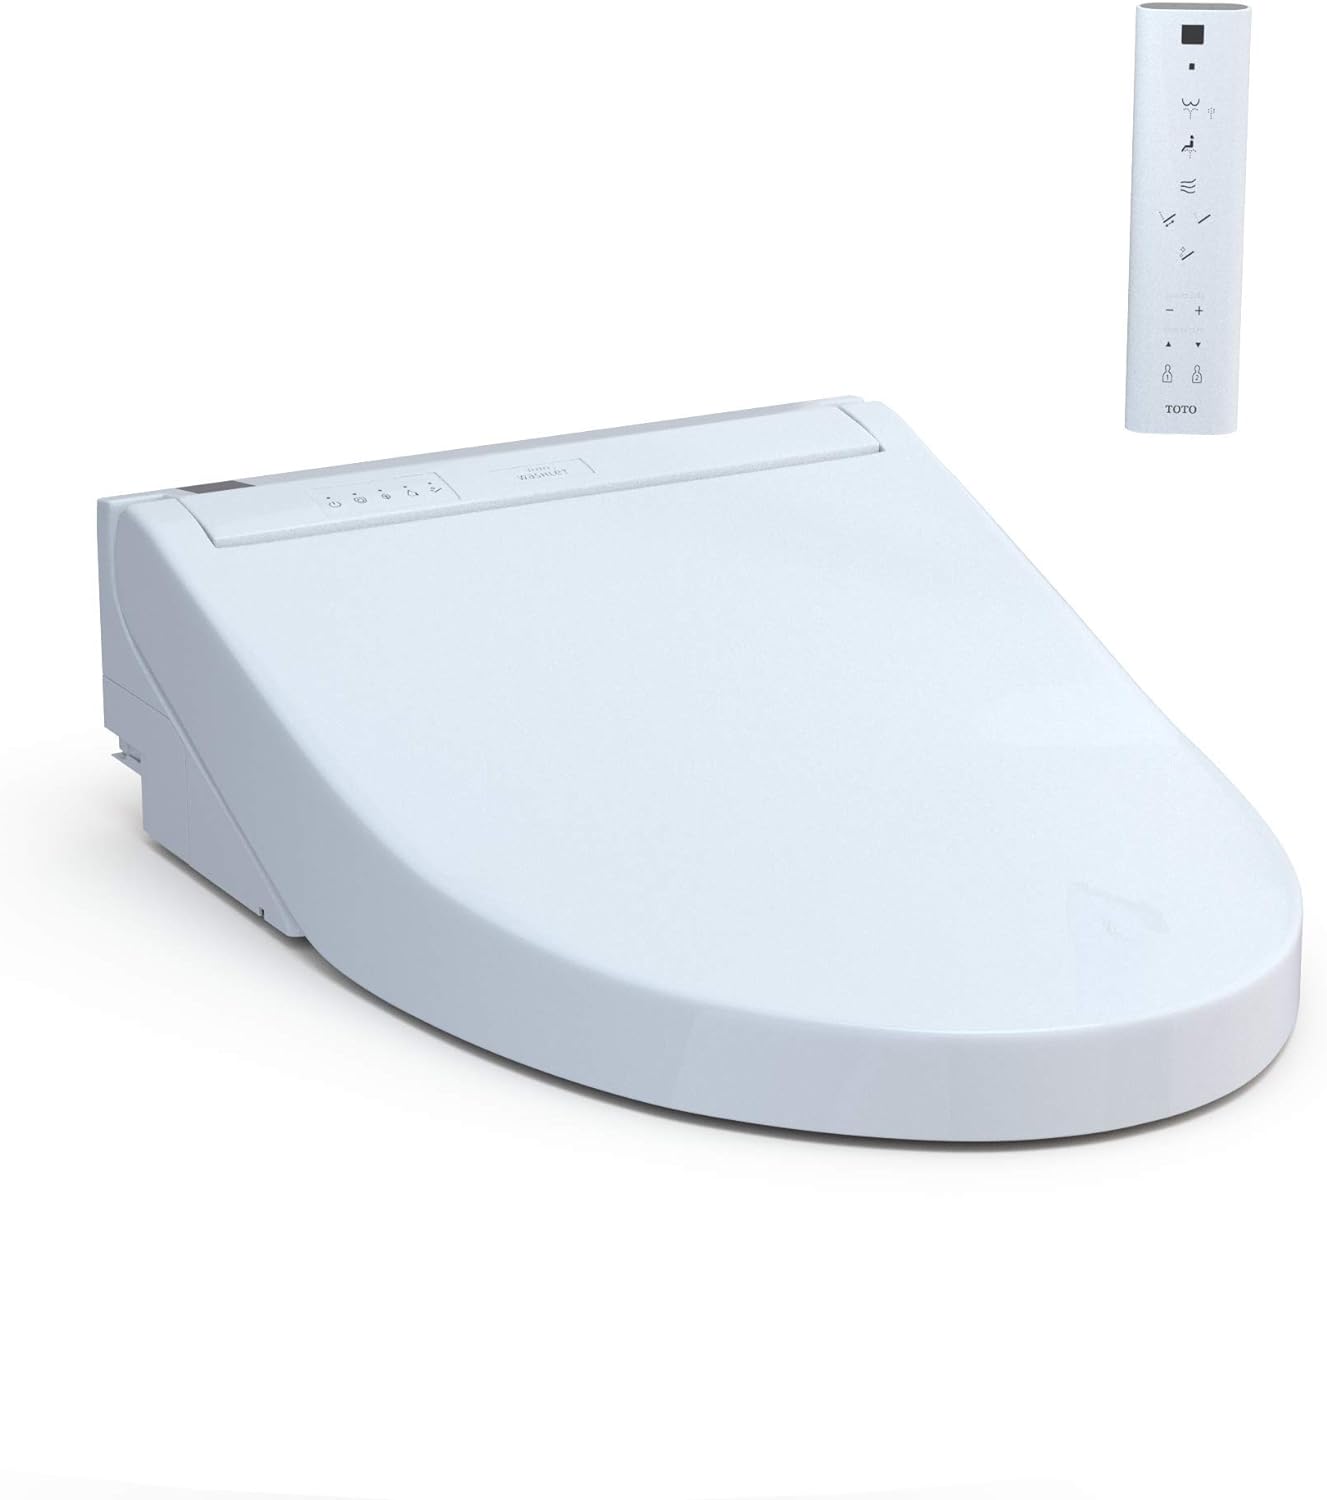 TOTO SW3084#01 WASHLET C5 Electronic Bidet Toilet Seat with PREMIST and EWATER+ Wand Cleaning, Elongated, Cotton White $381.73 at Amazon